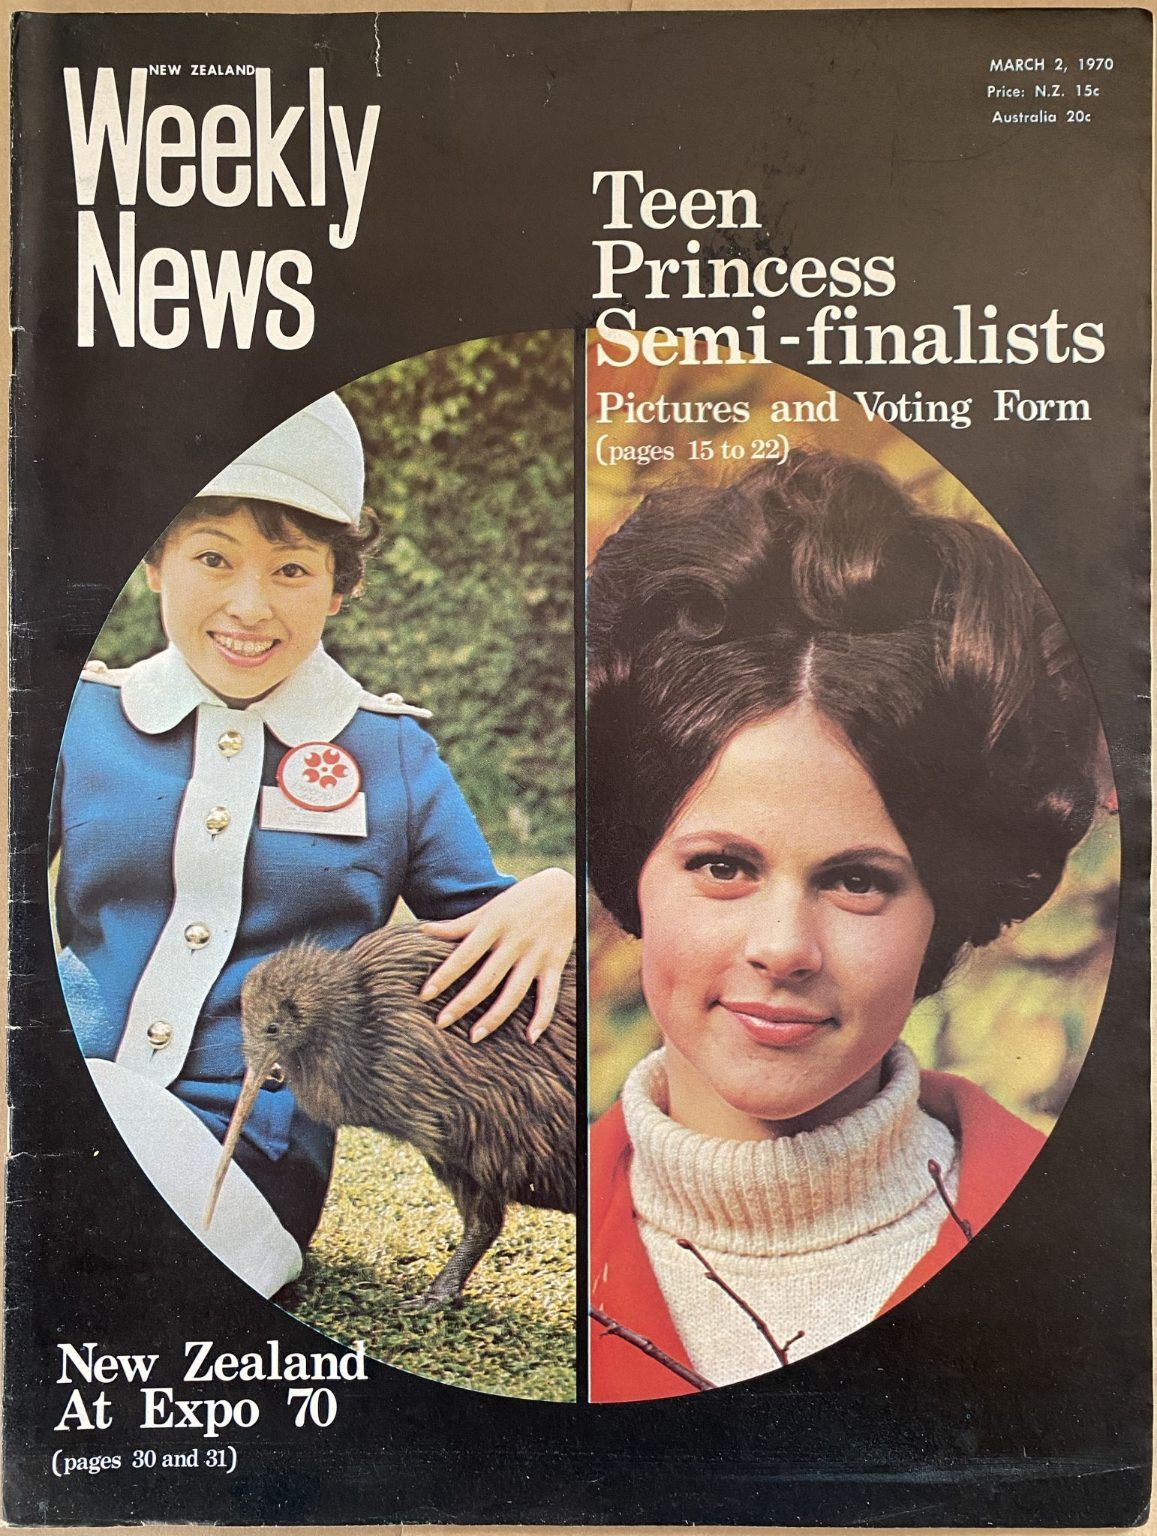 OLD NEWSPAPER: New Zealand Weekly News, No. 5544, 2 March 1970